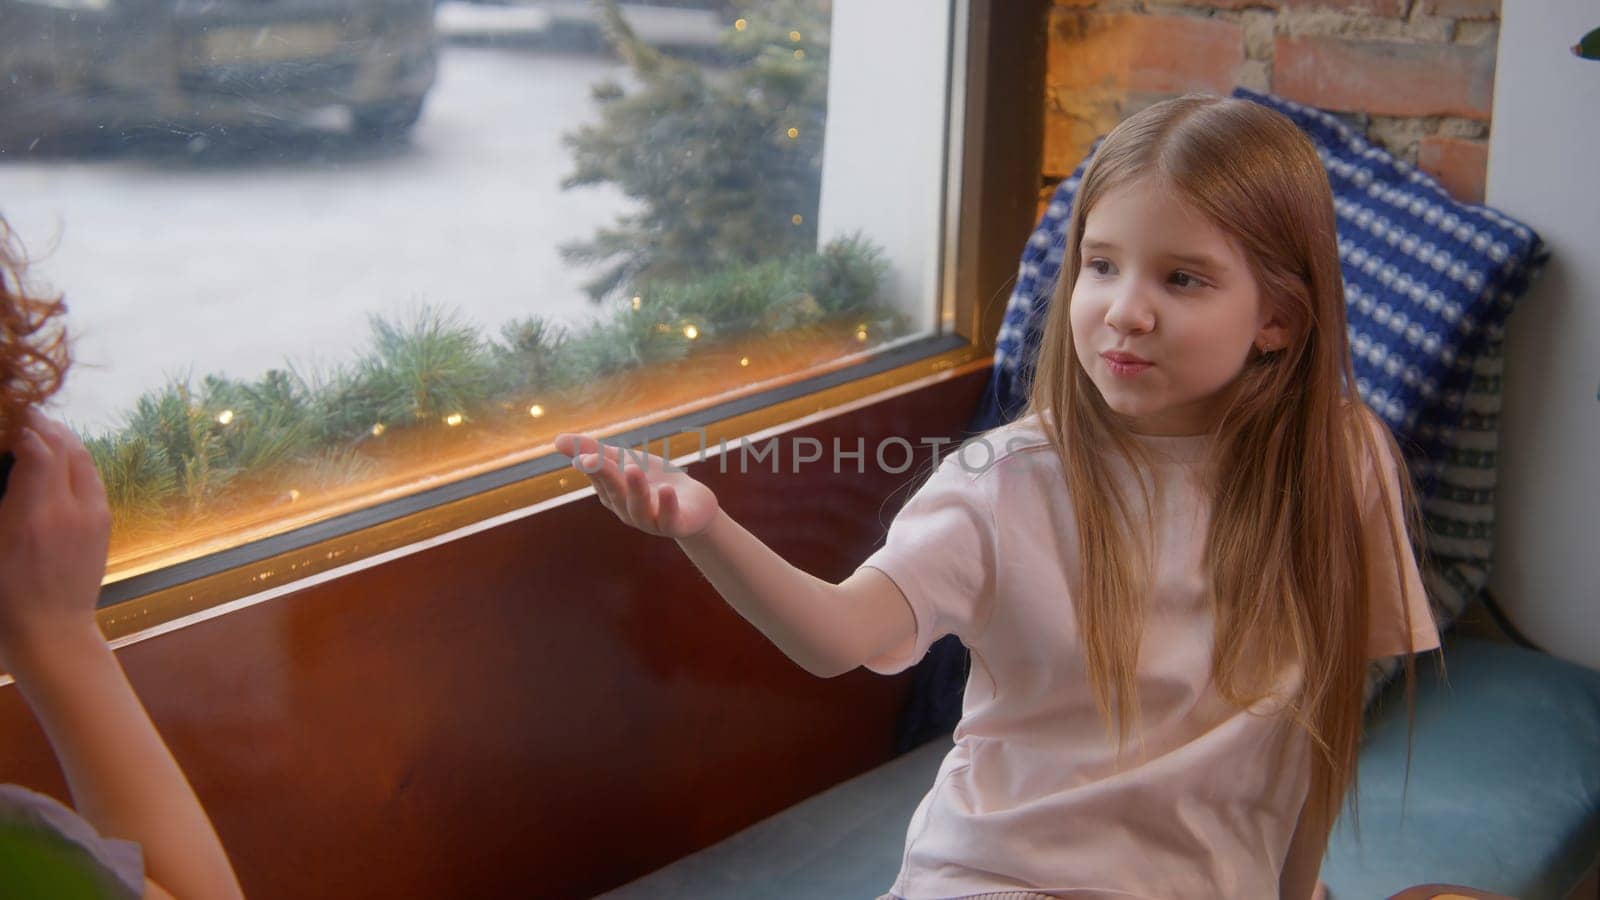 Boy and girl are talking in cafe. Stock footage. Cute couple of kids are sitting in cafe. Children chat sweetly together in cafe. Childhood infatuation by Mediawhalestock